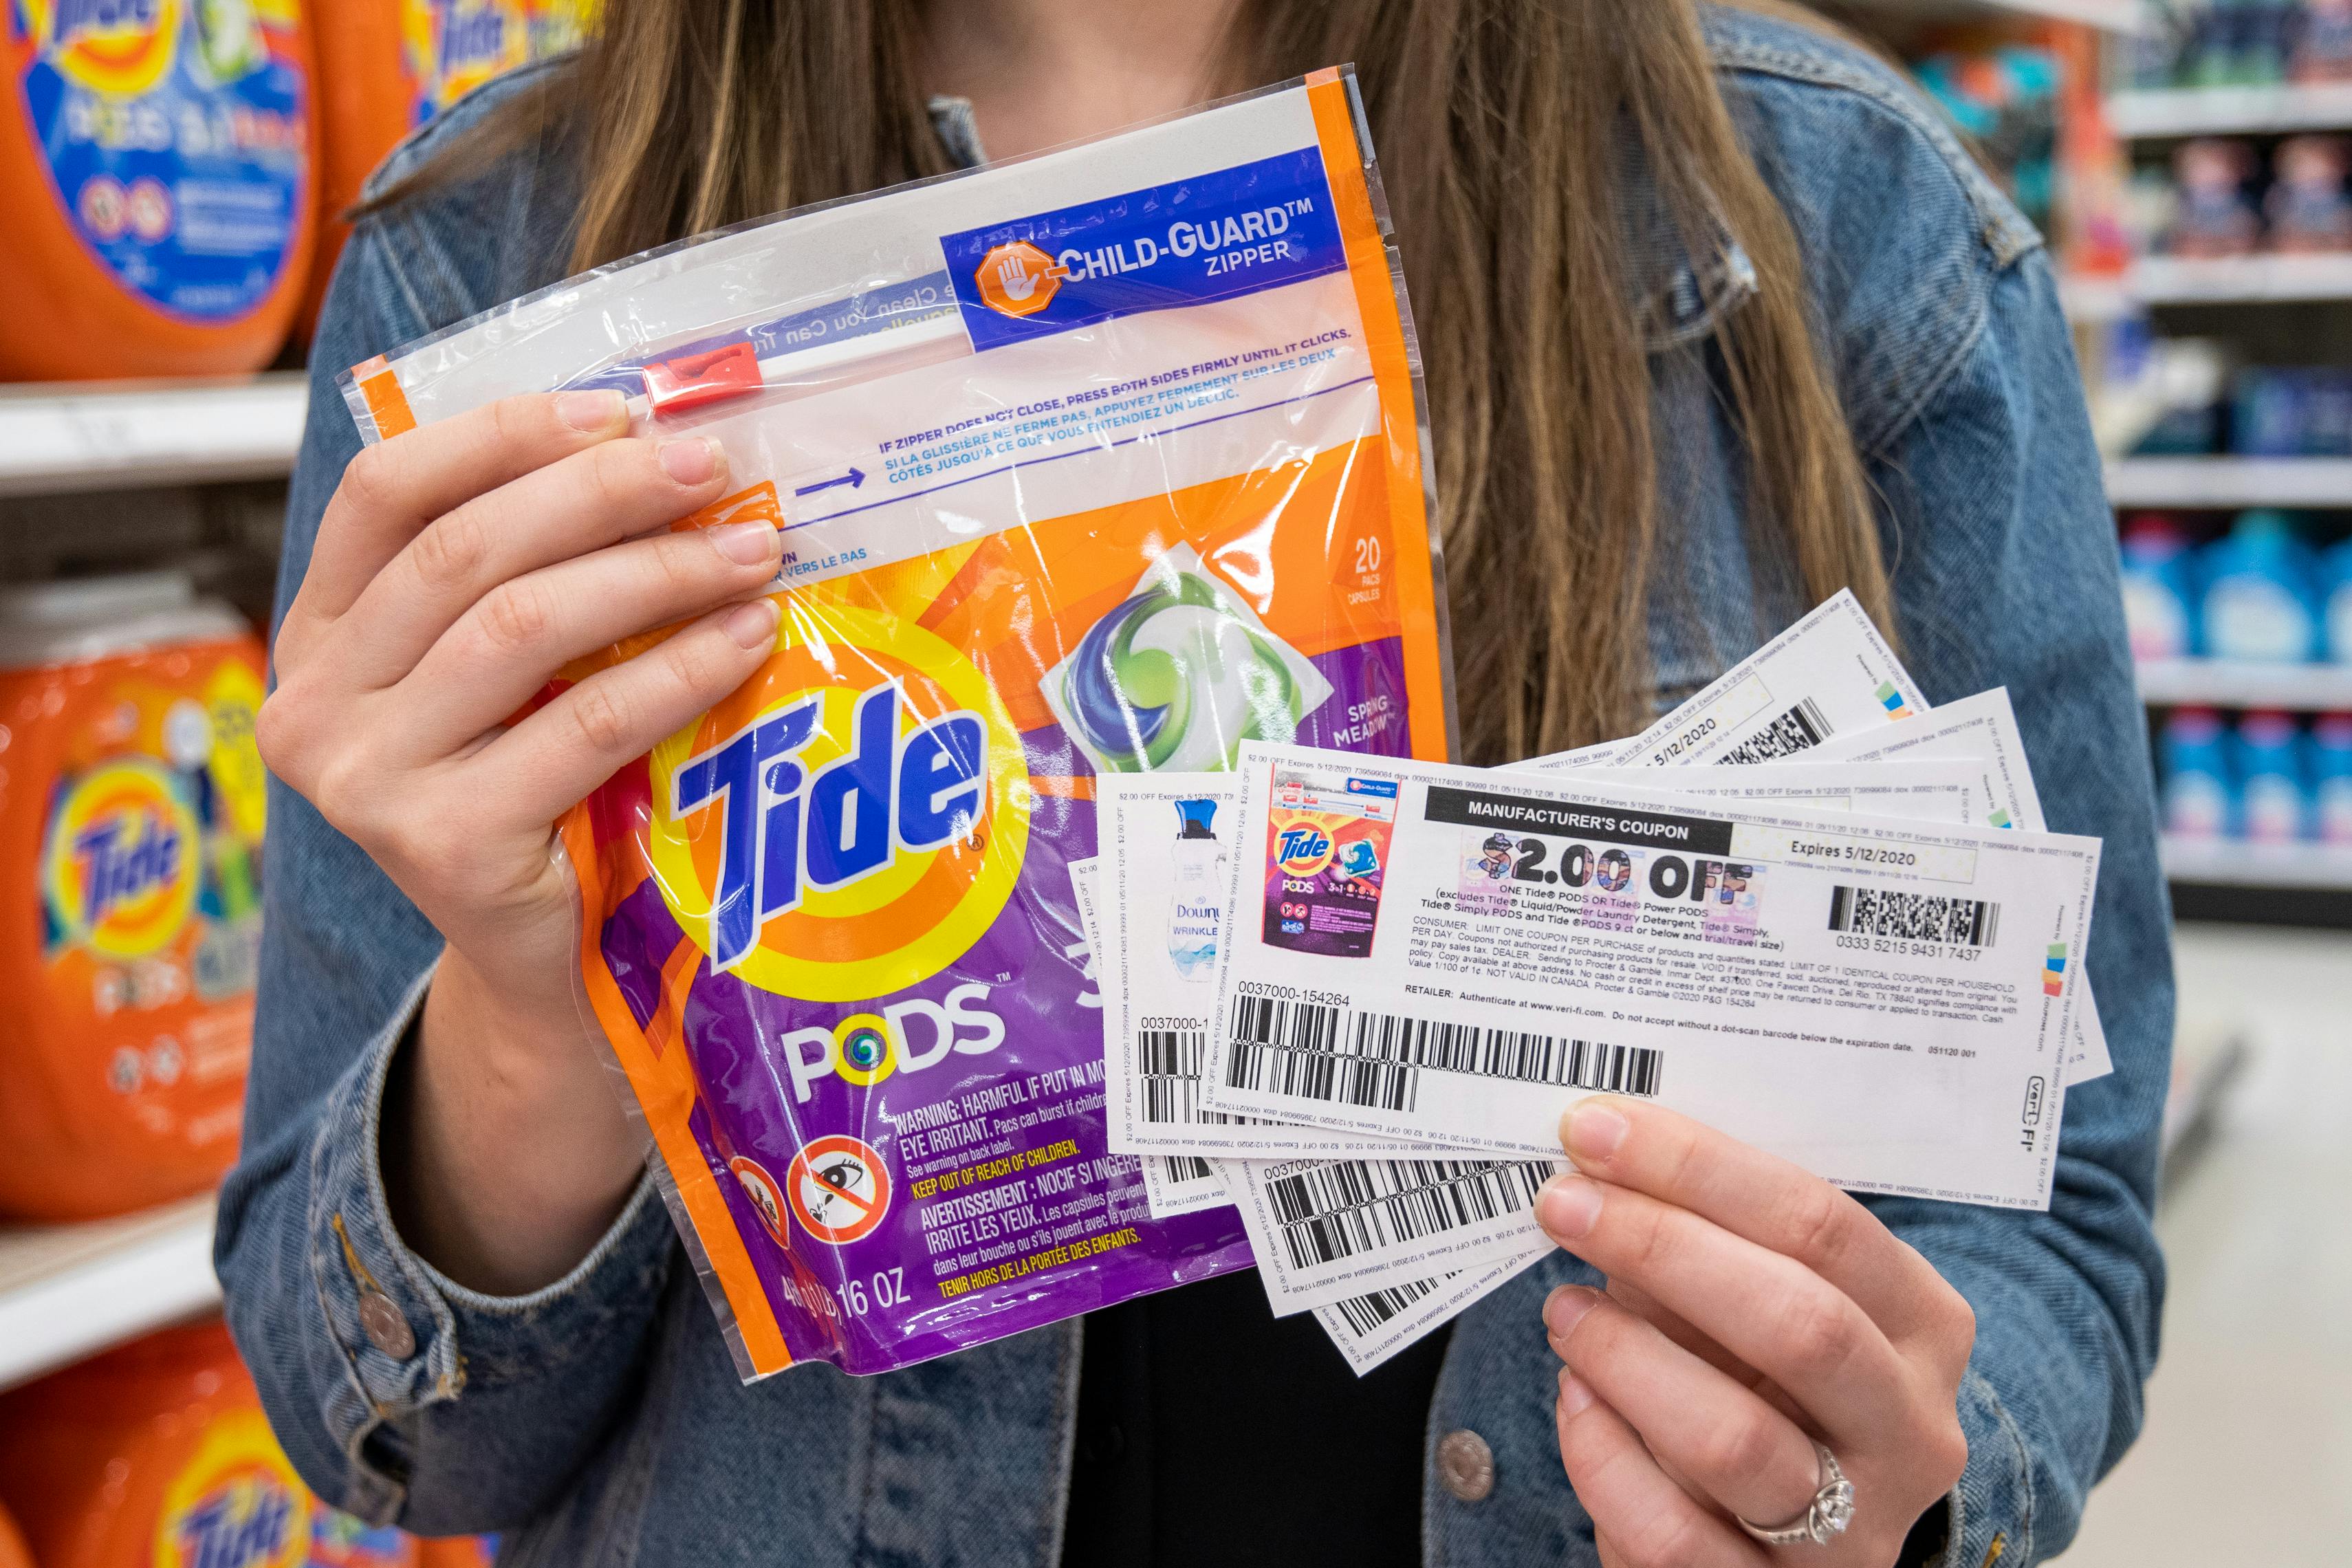 A woman holding a pack of tide Pods with printed manufacture coupons in hand.